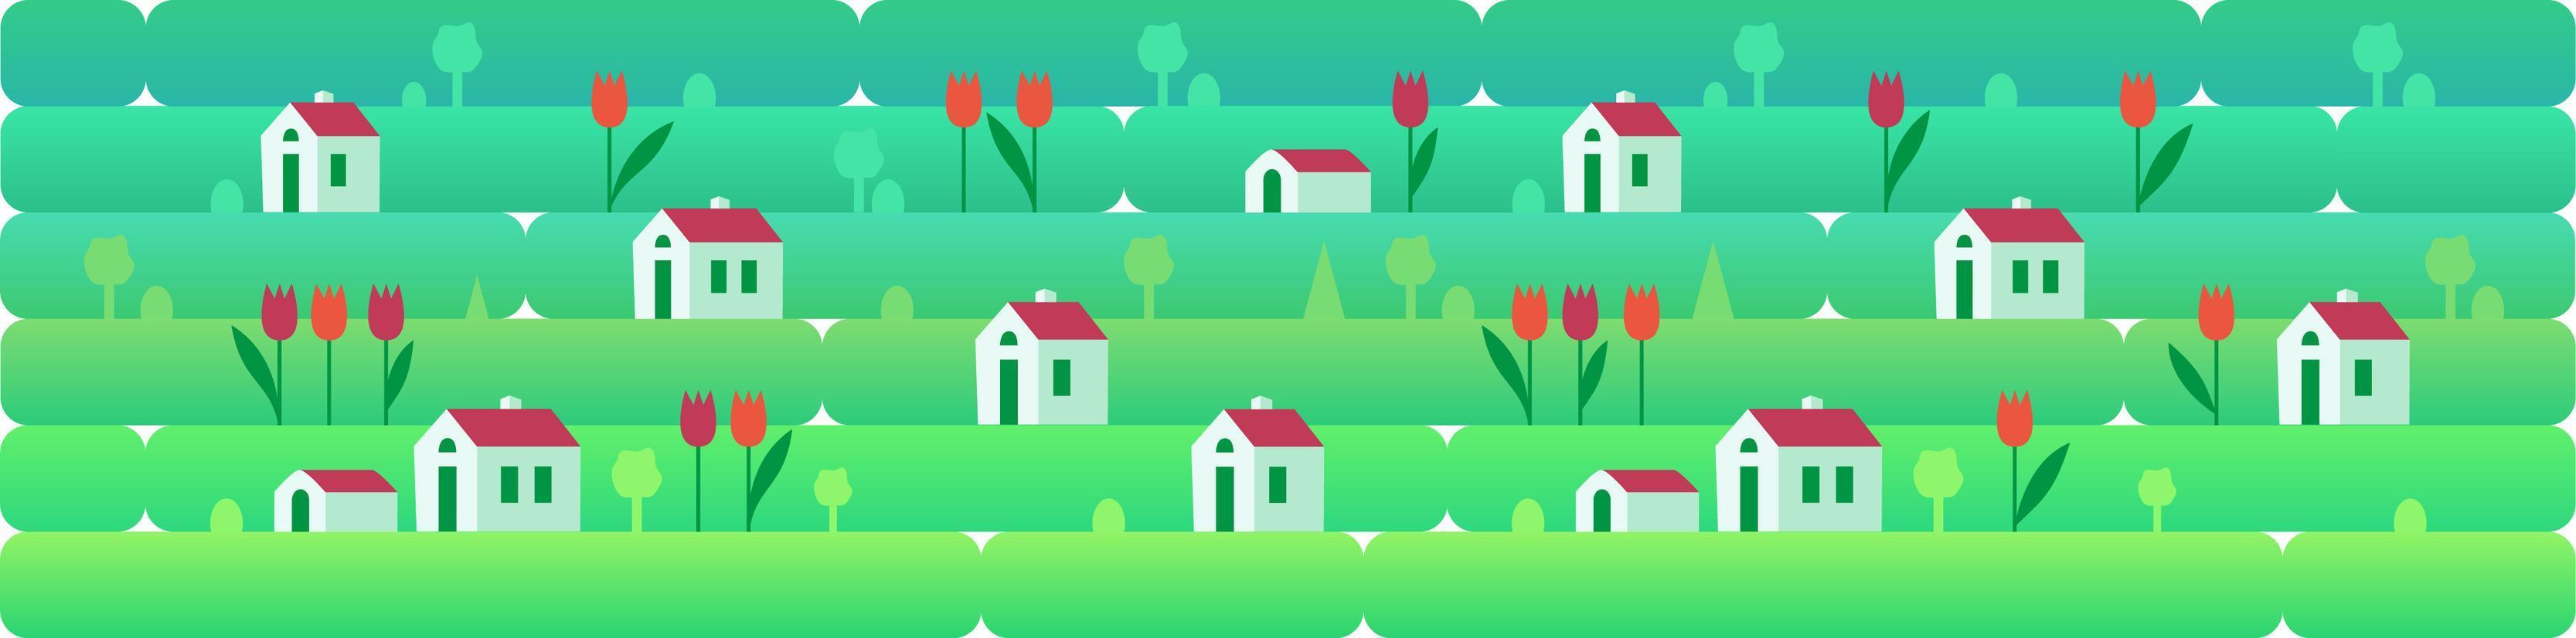 Banner a sammer or spring day landscape with small houses and red tulips, against a background of grass, nature, hills. Vector illustration in flat style for design, games or web sites